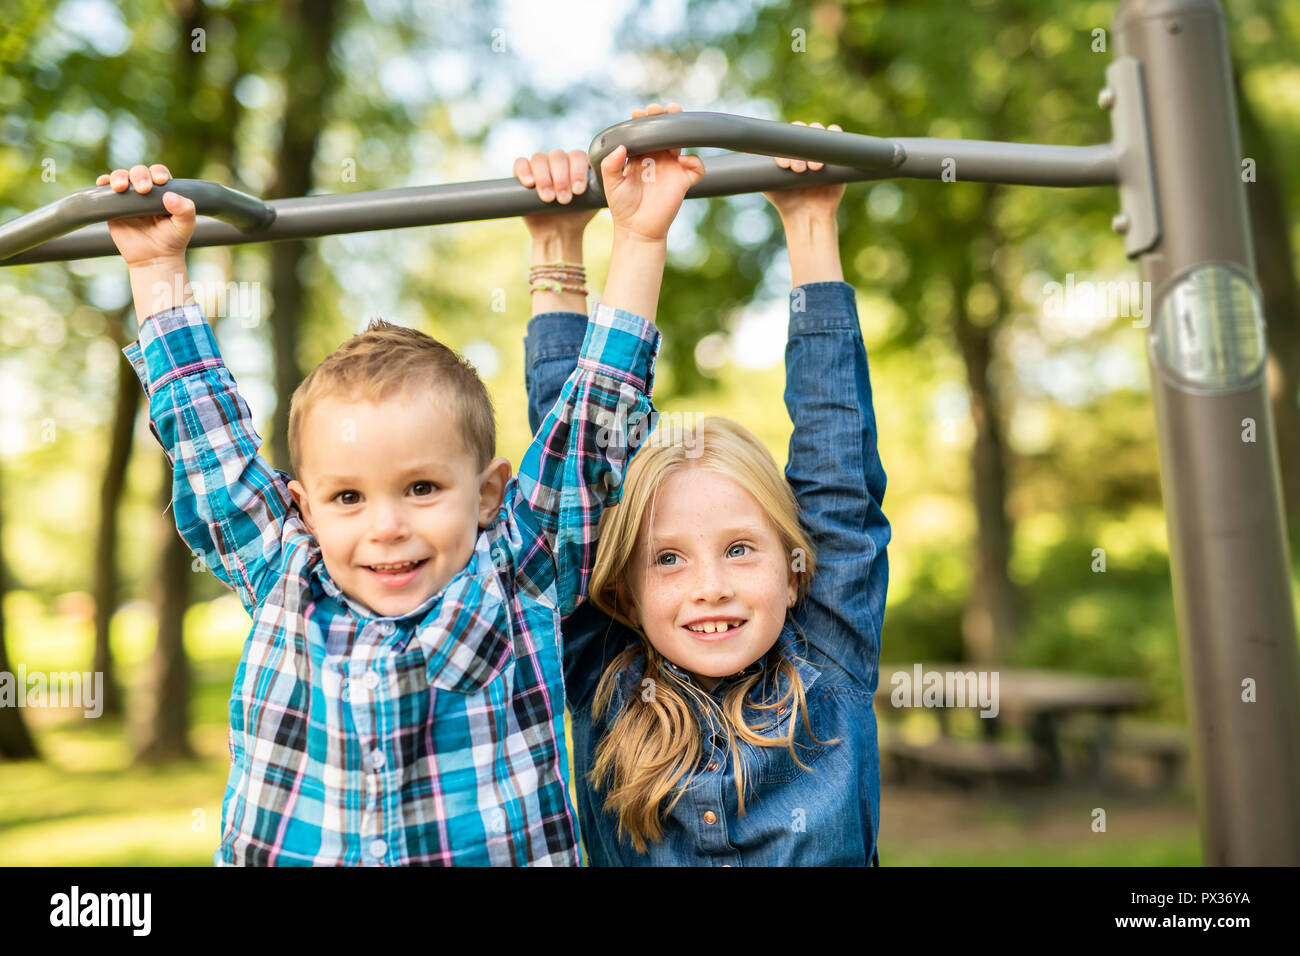 The Two young children having fun on the playground Stock Photo